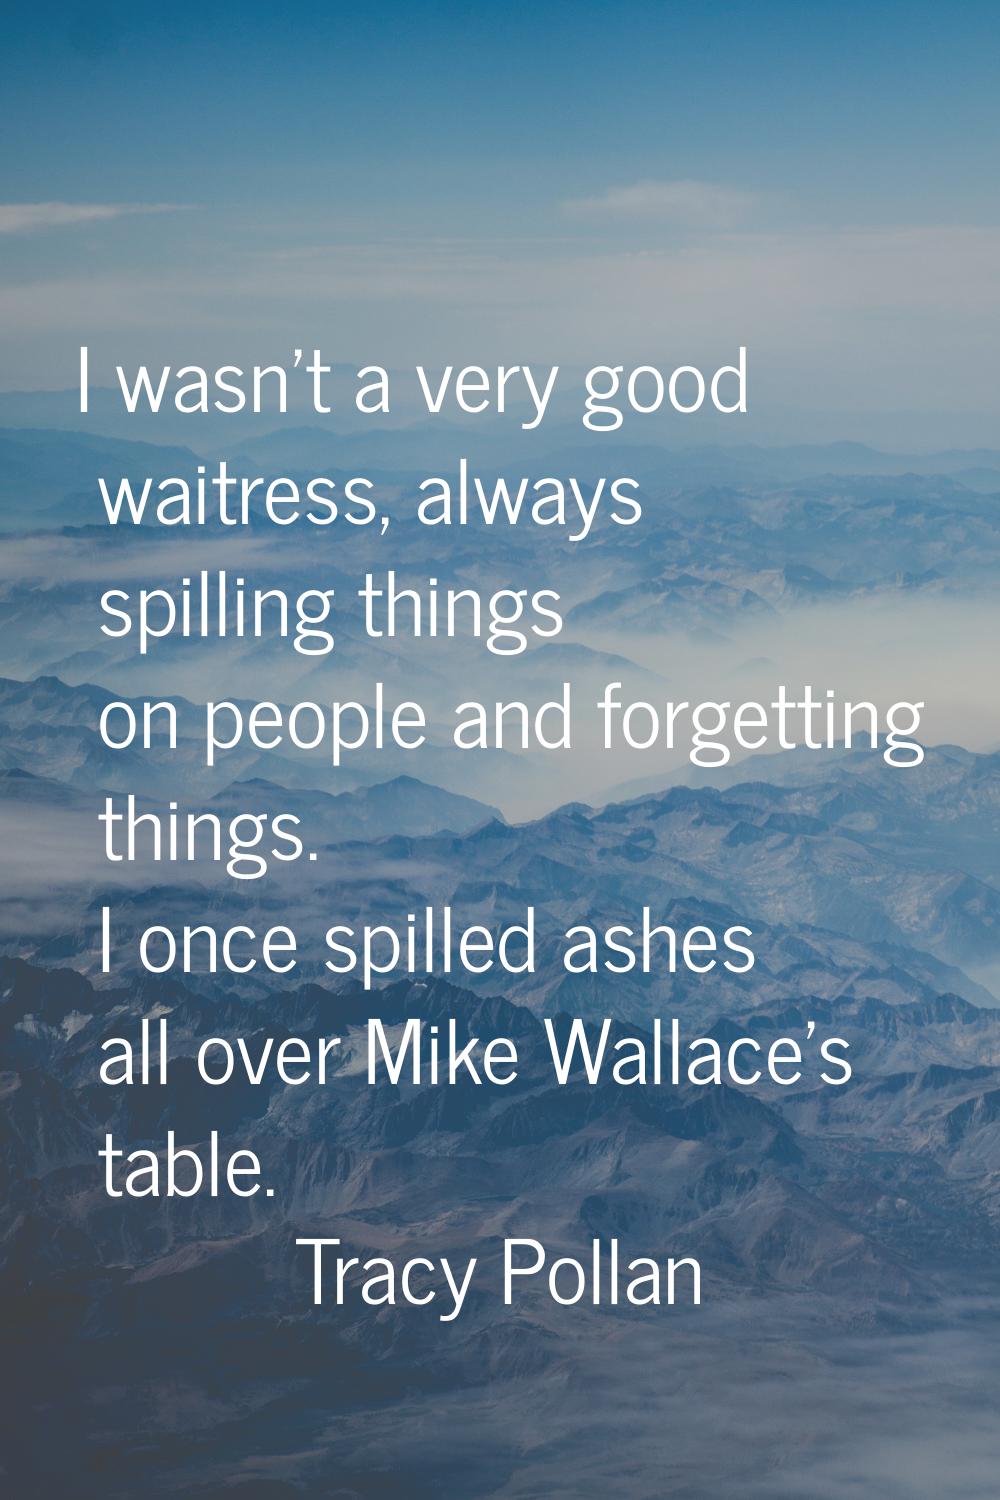 I wasn't a very good waitress, always spilling things on people and forgetting things. I once spill